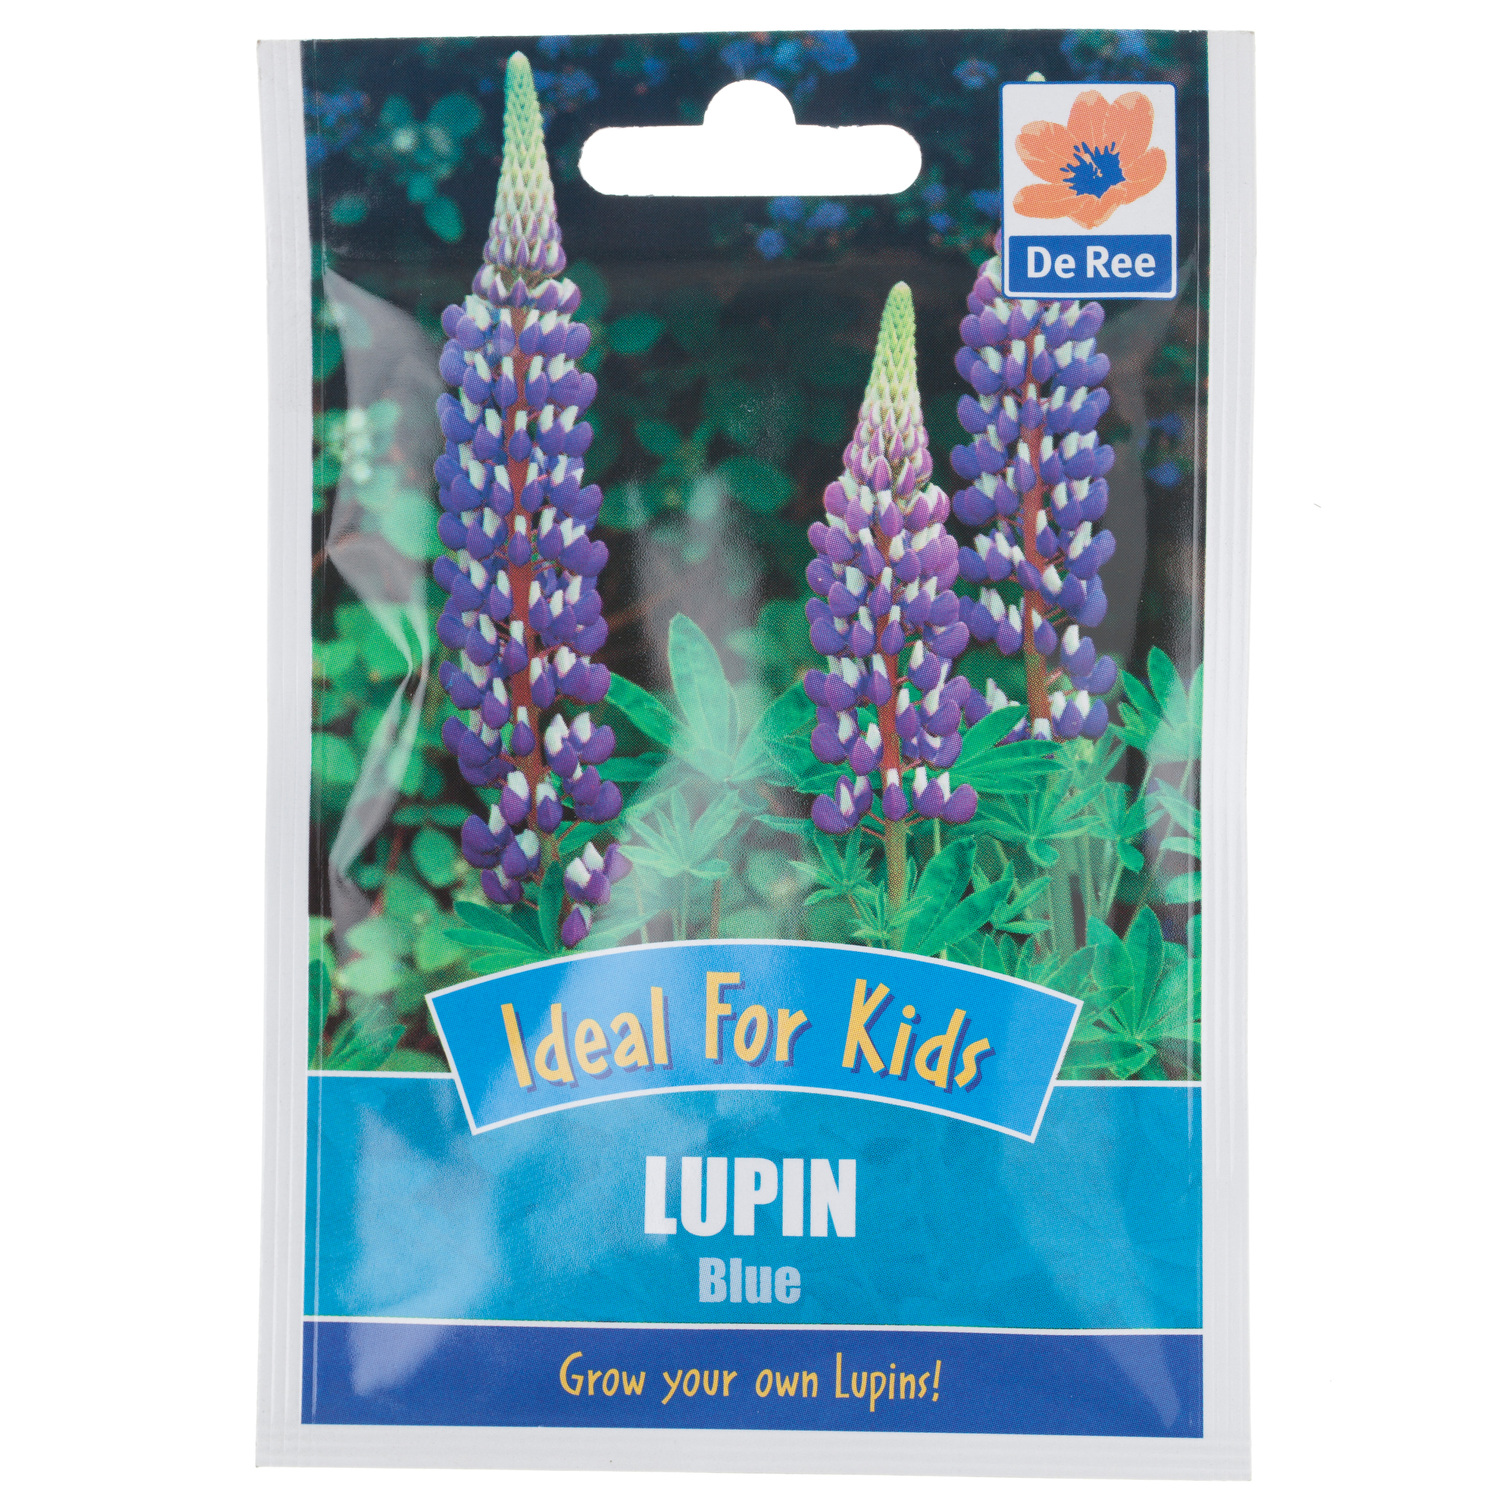 Lupin Blue Seed Packet Image